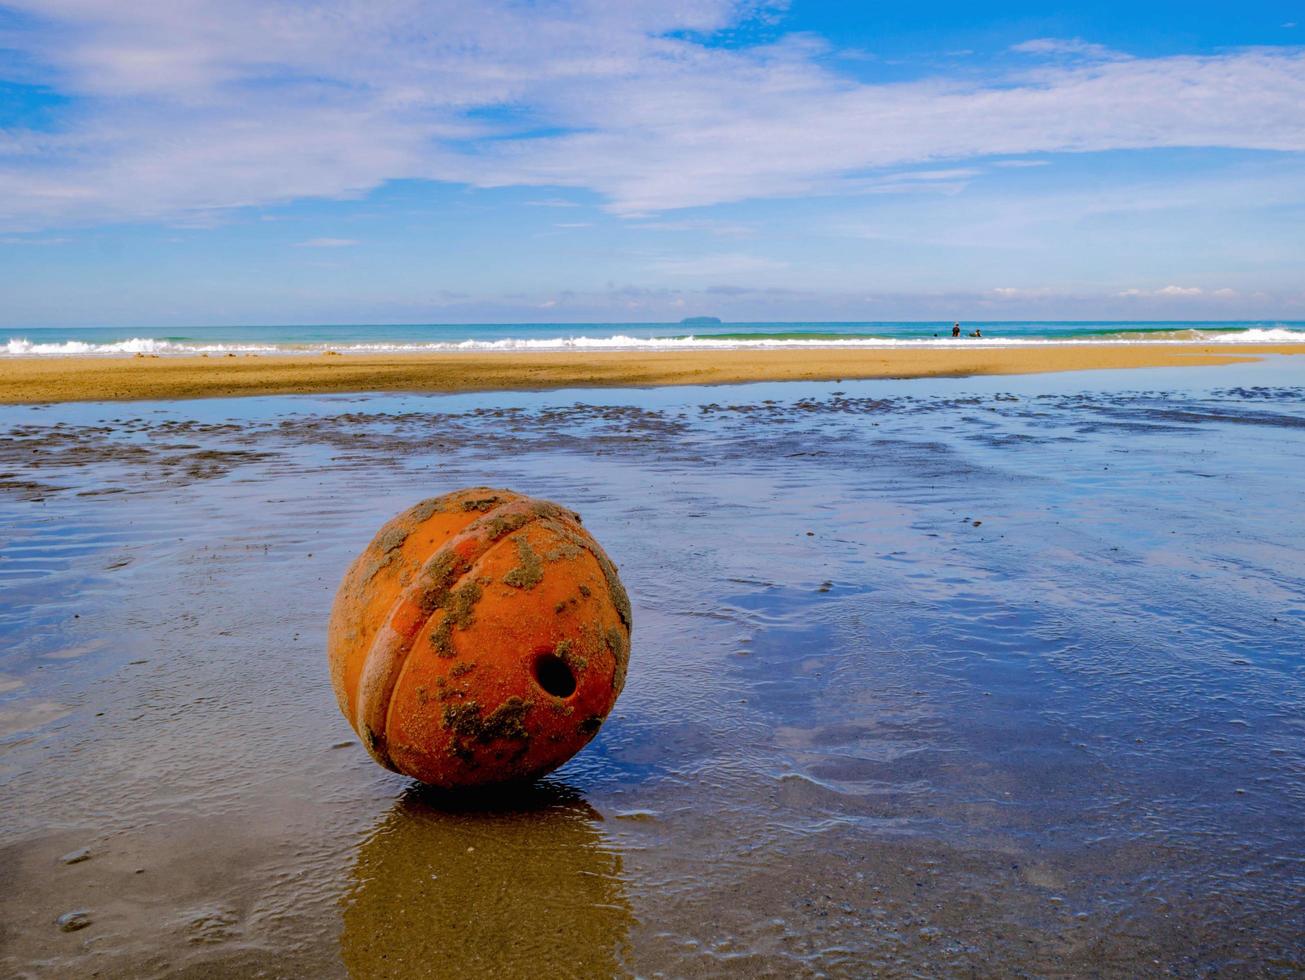 Old and Dirty Buoy Ball on the Beach in vacation time,Holiday with idyllic ocean,Summer concept photo